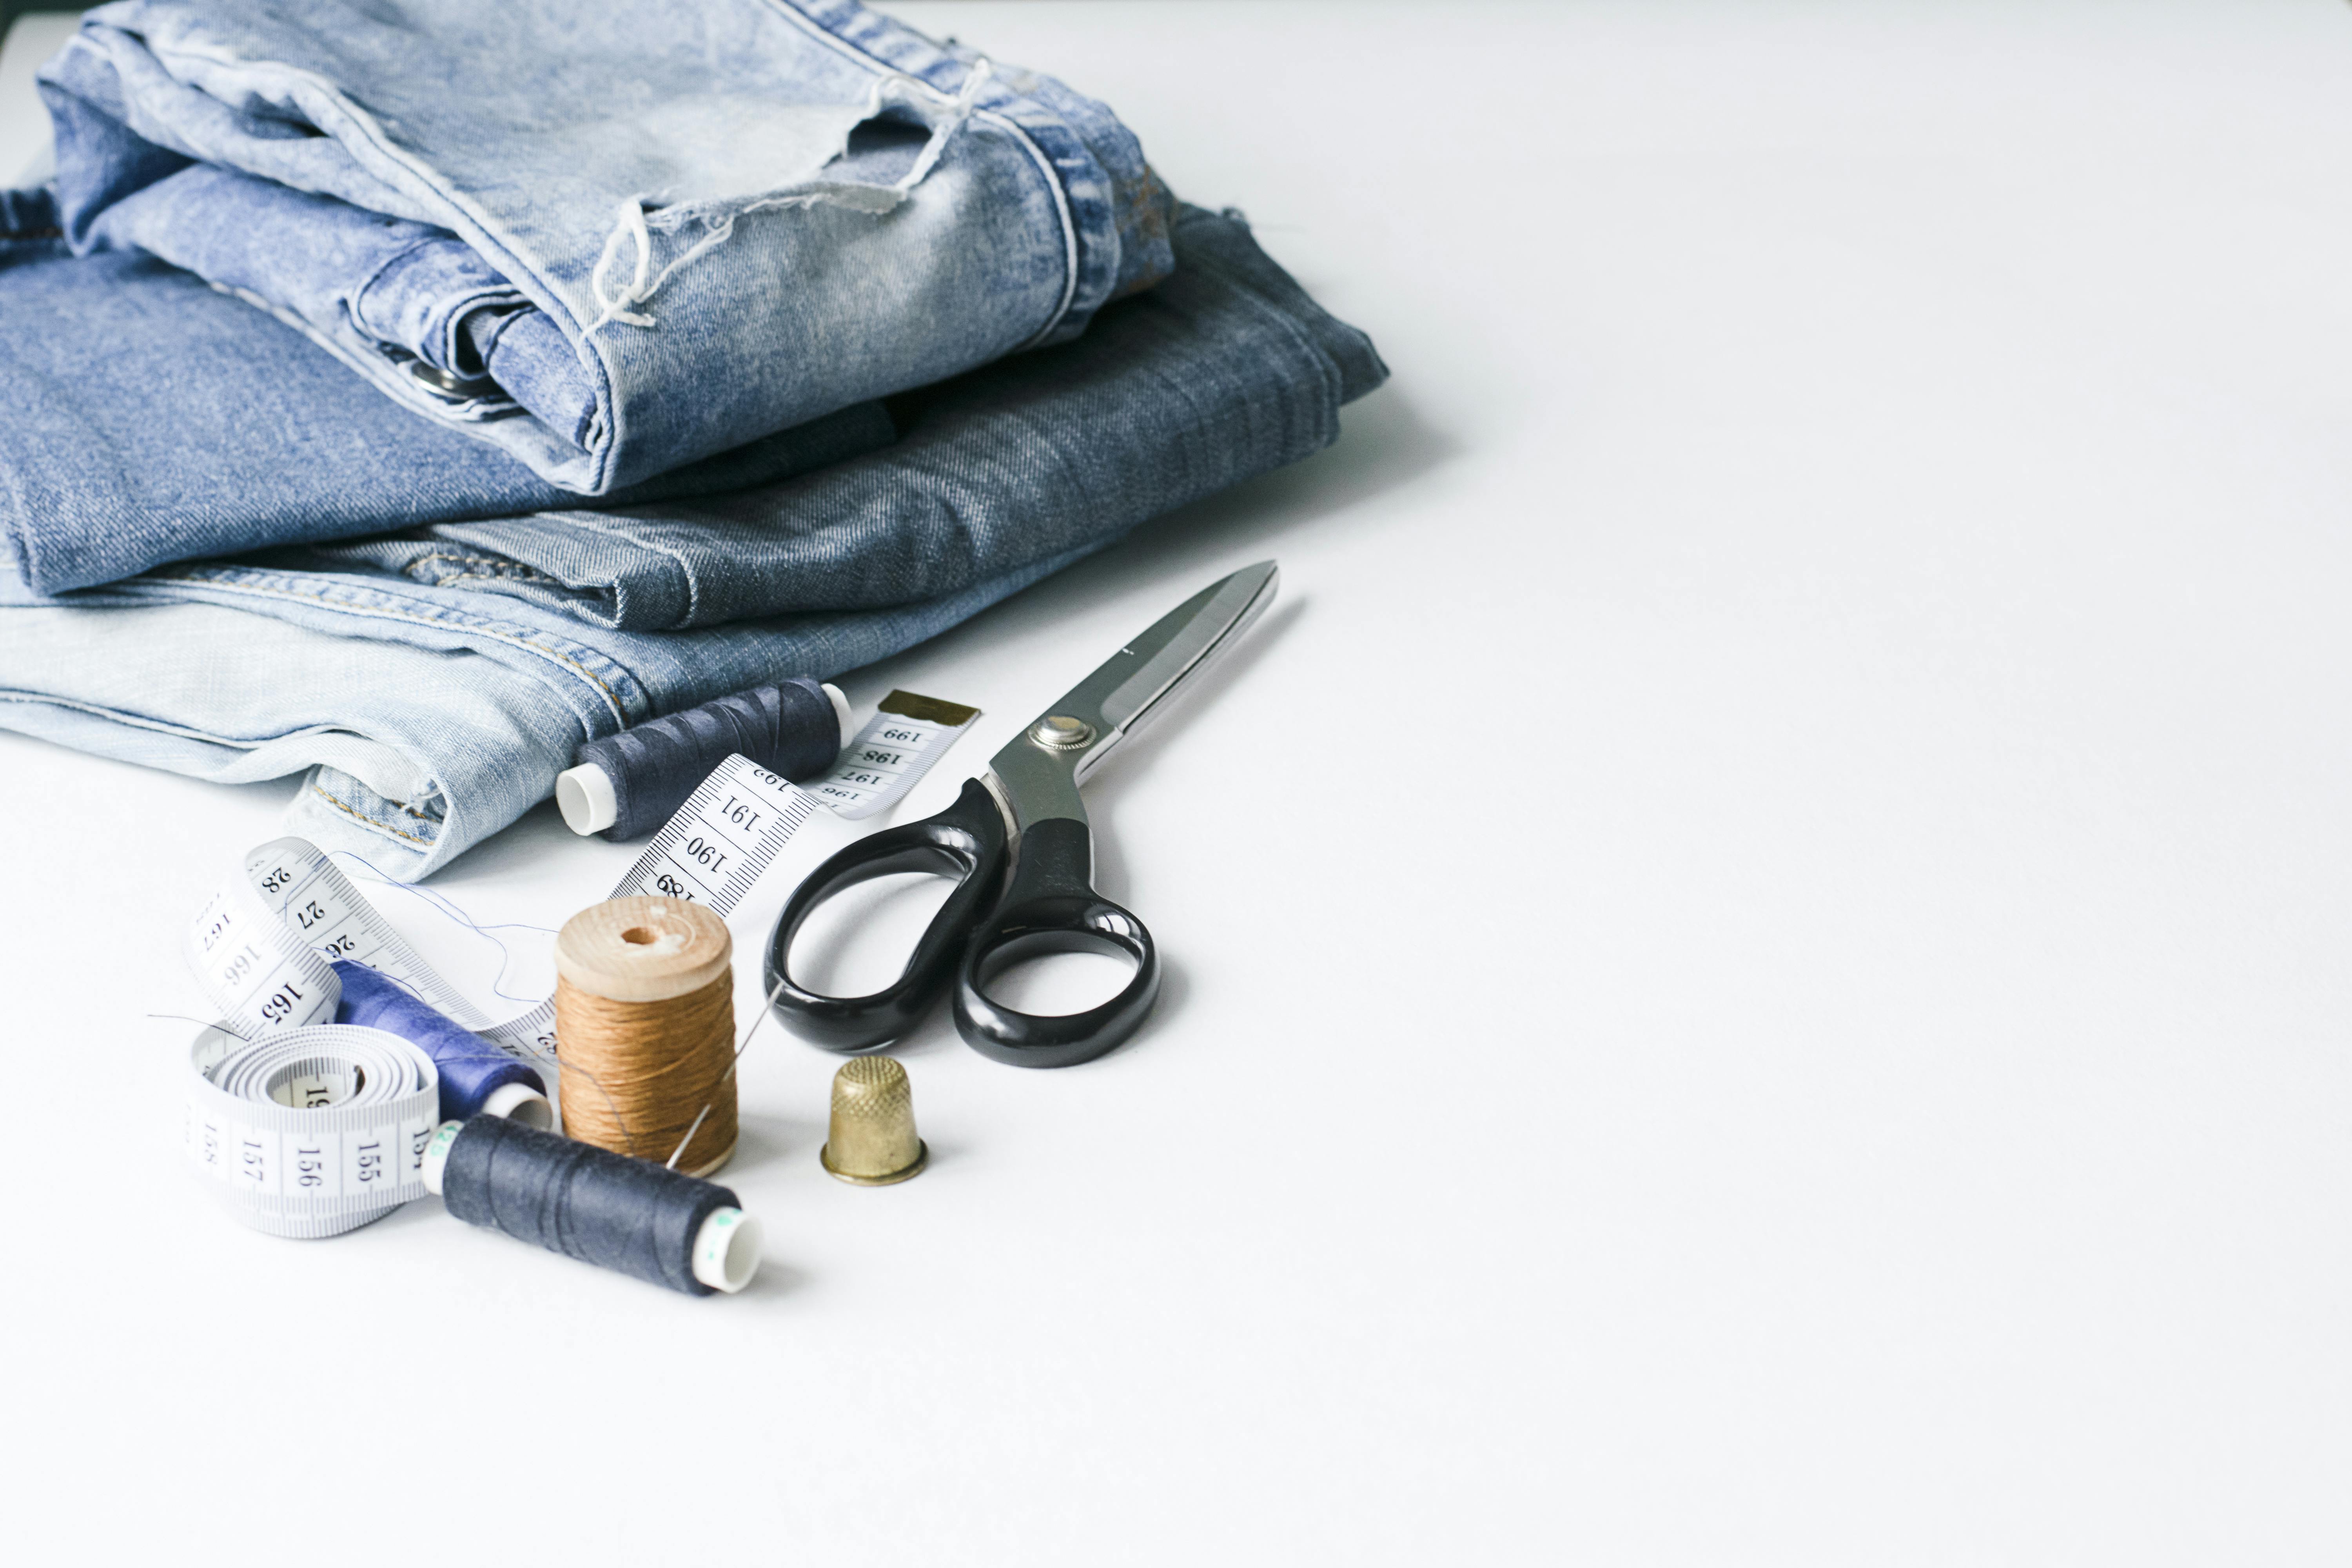  supplies needed for sewing and ripping jeans